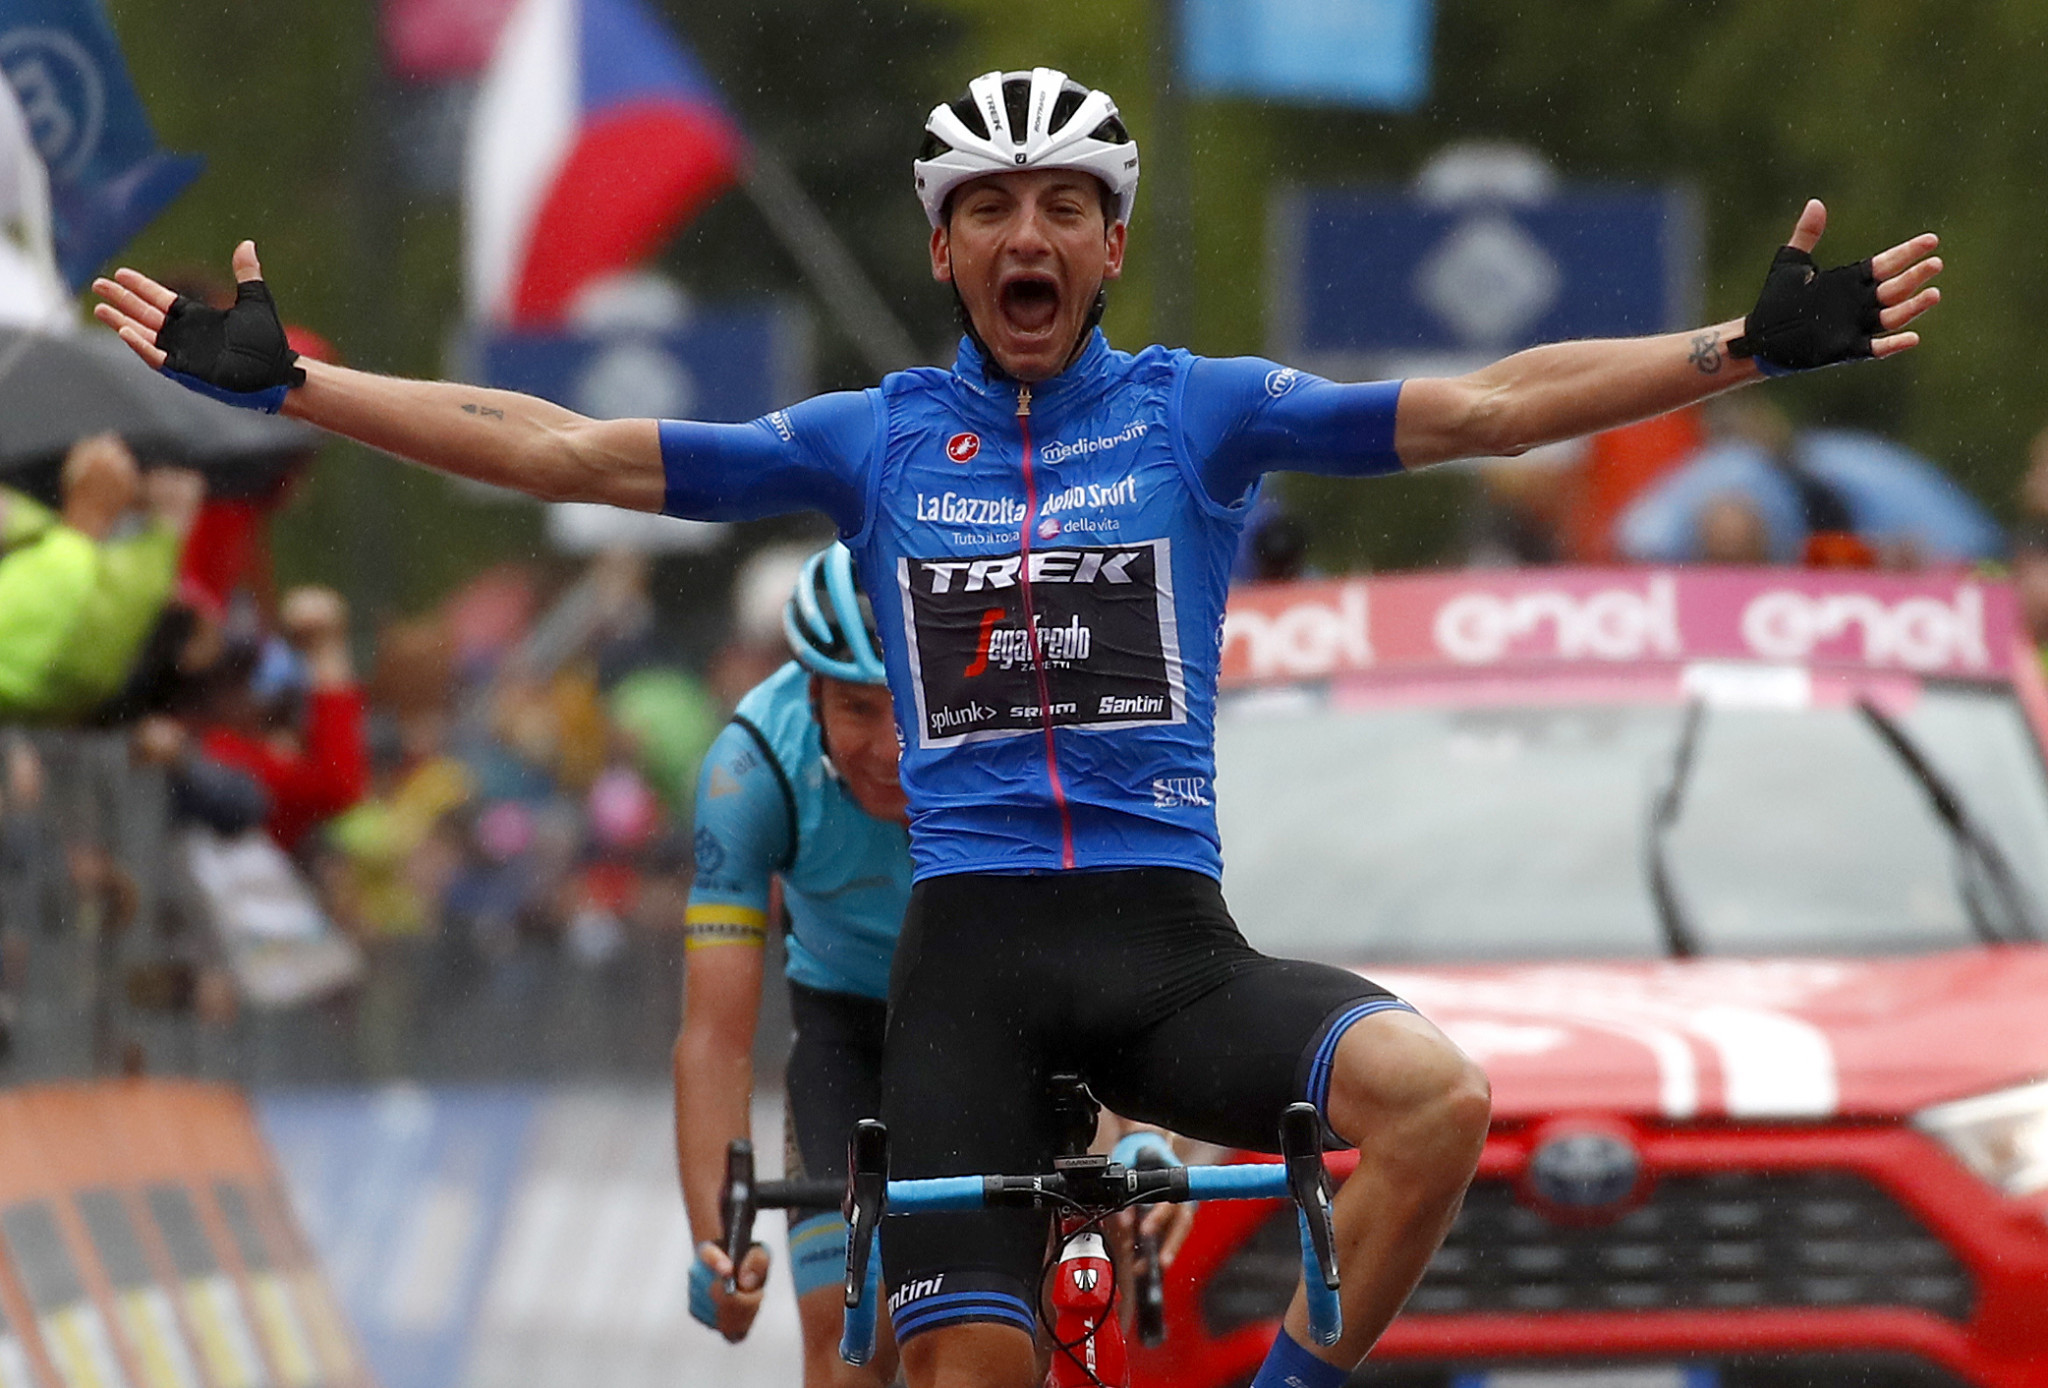 Ciccone wins stage 16 of Giro d'Italia as Carapaz retains general classification lead